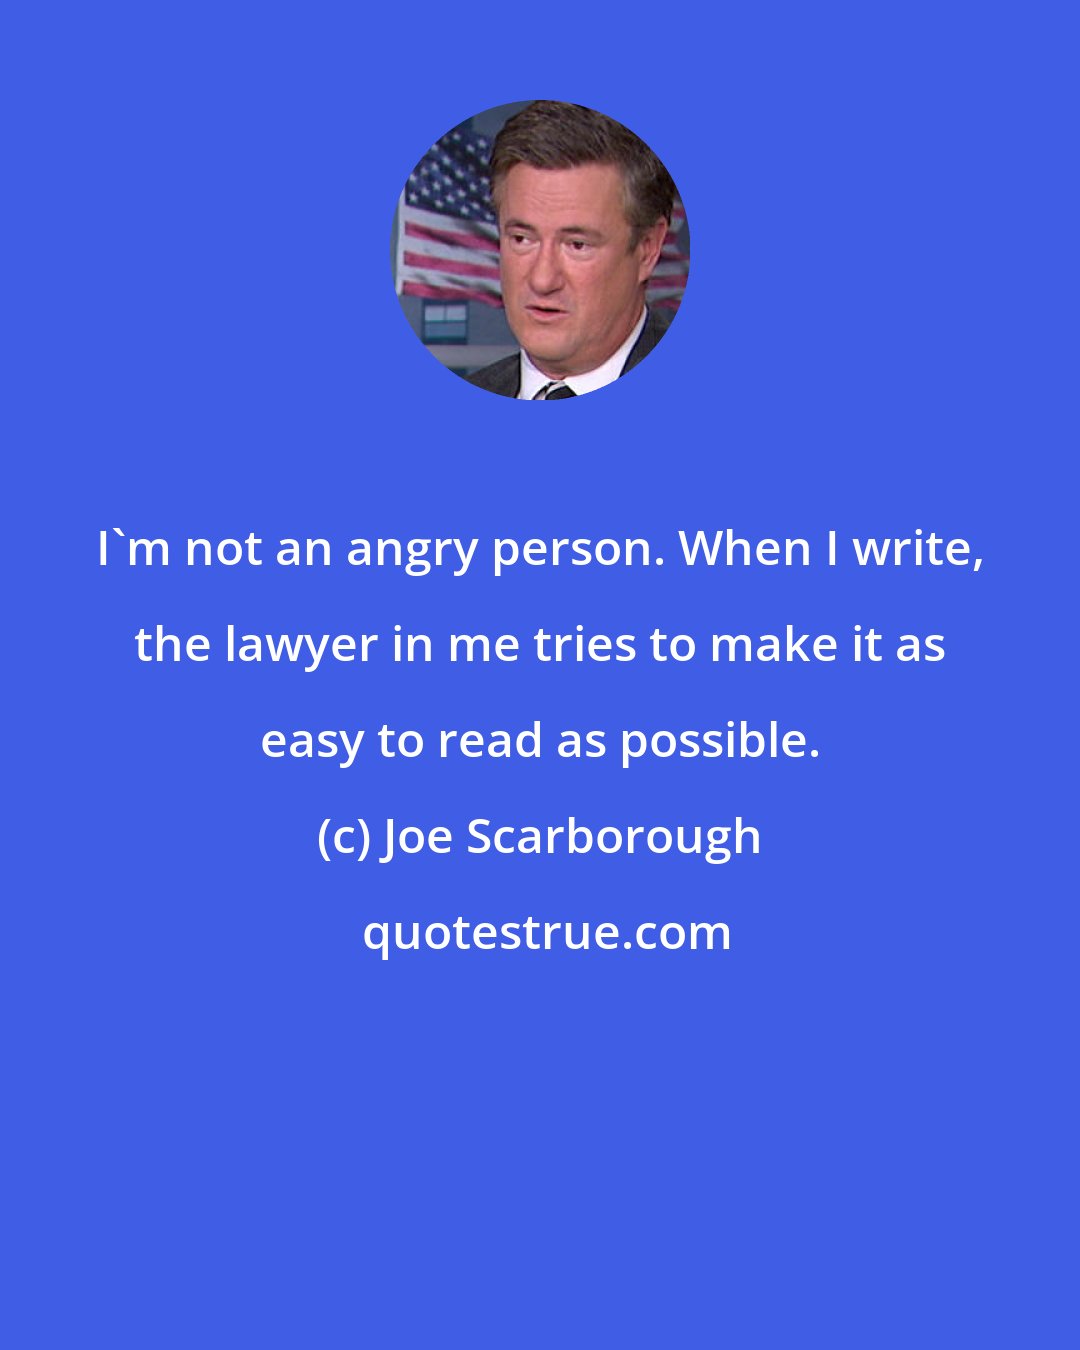 Joe Scarborough: I'm not an angry person. When I write, the lawyer in me tries to make it as easy to read as possible.